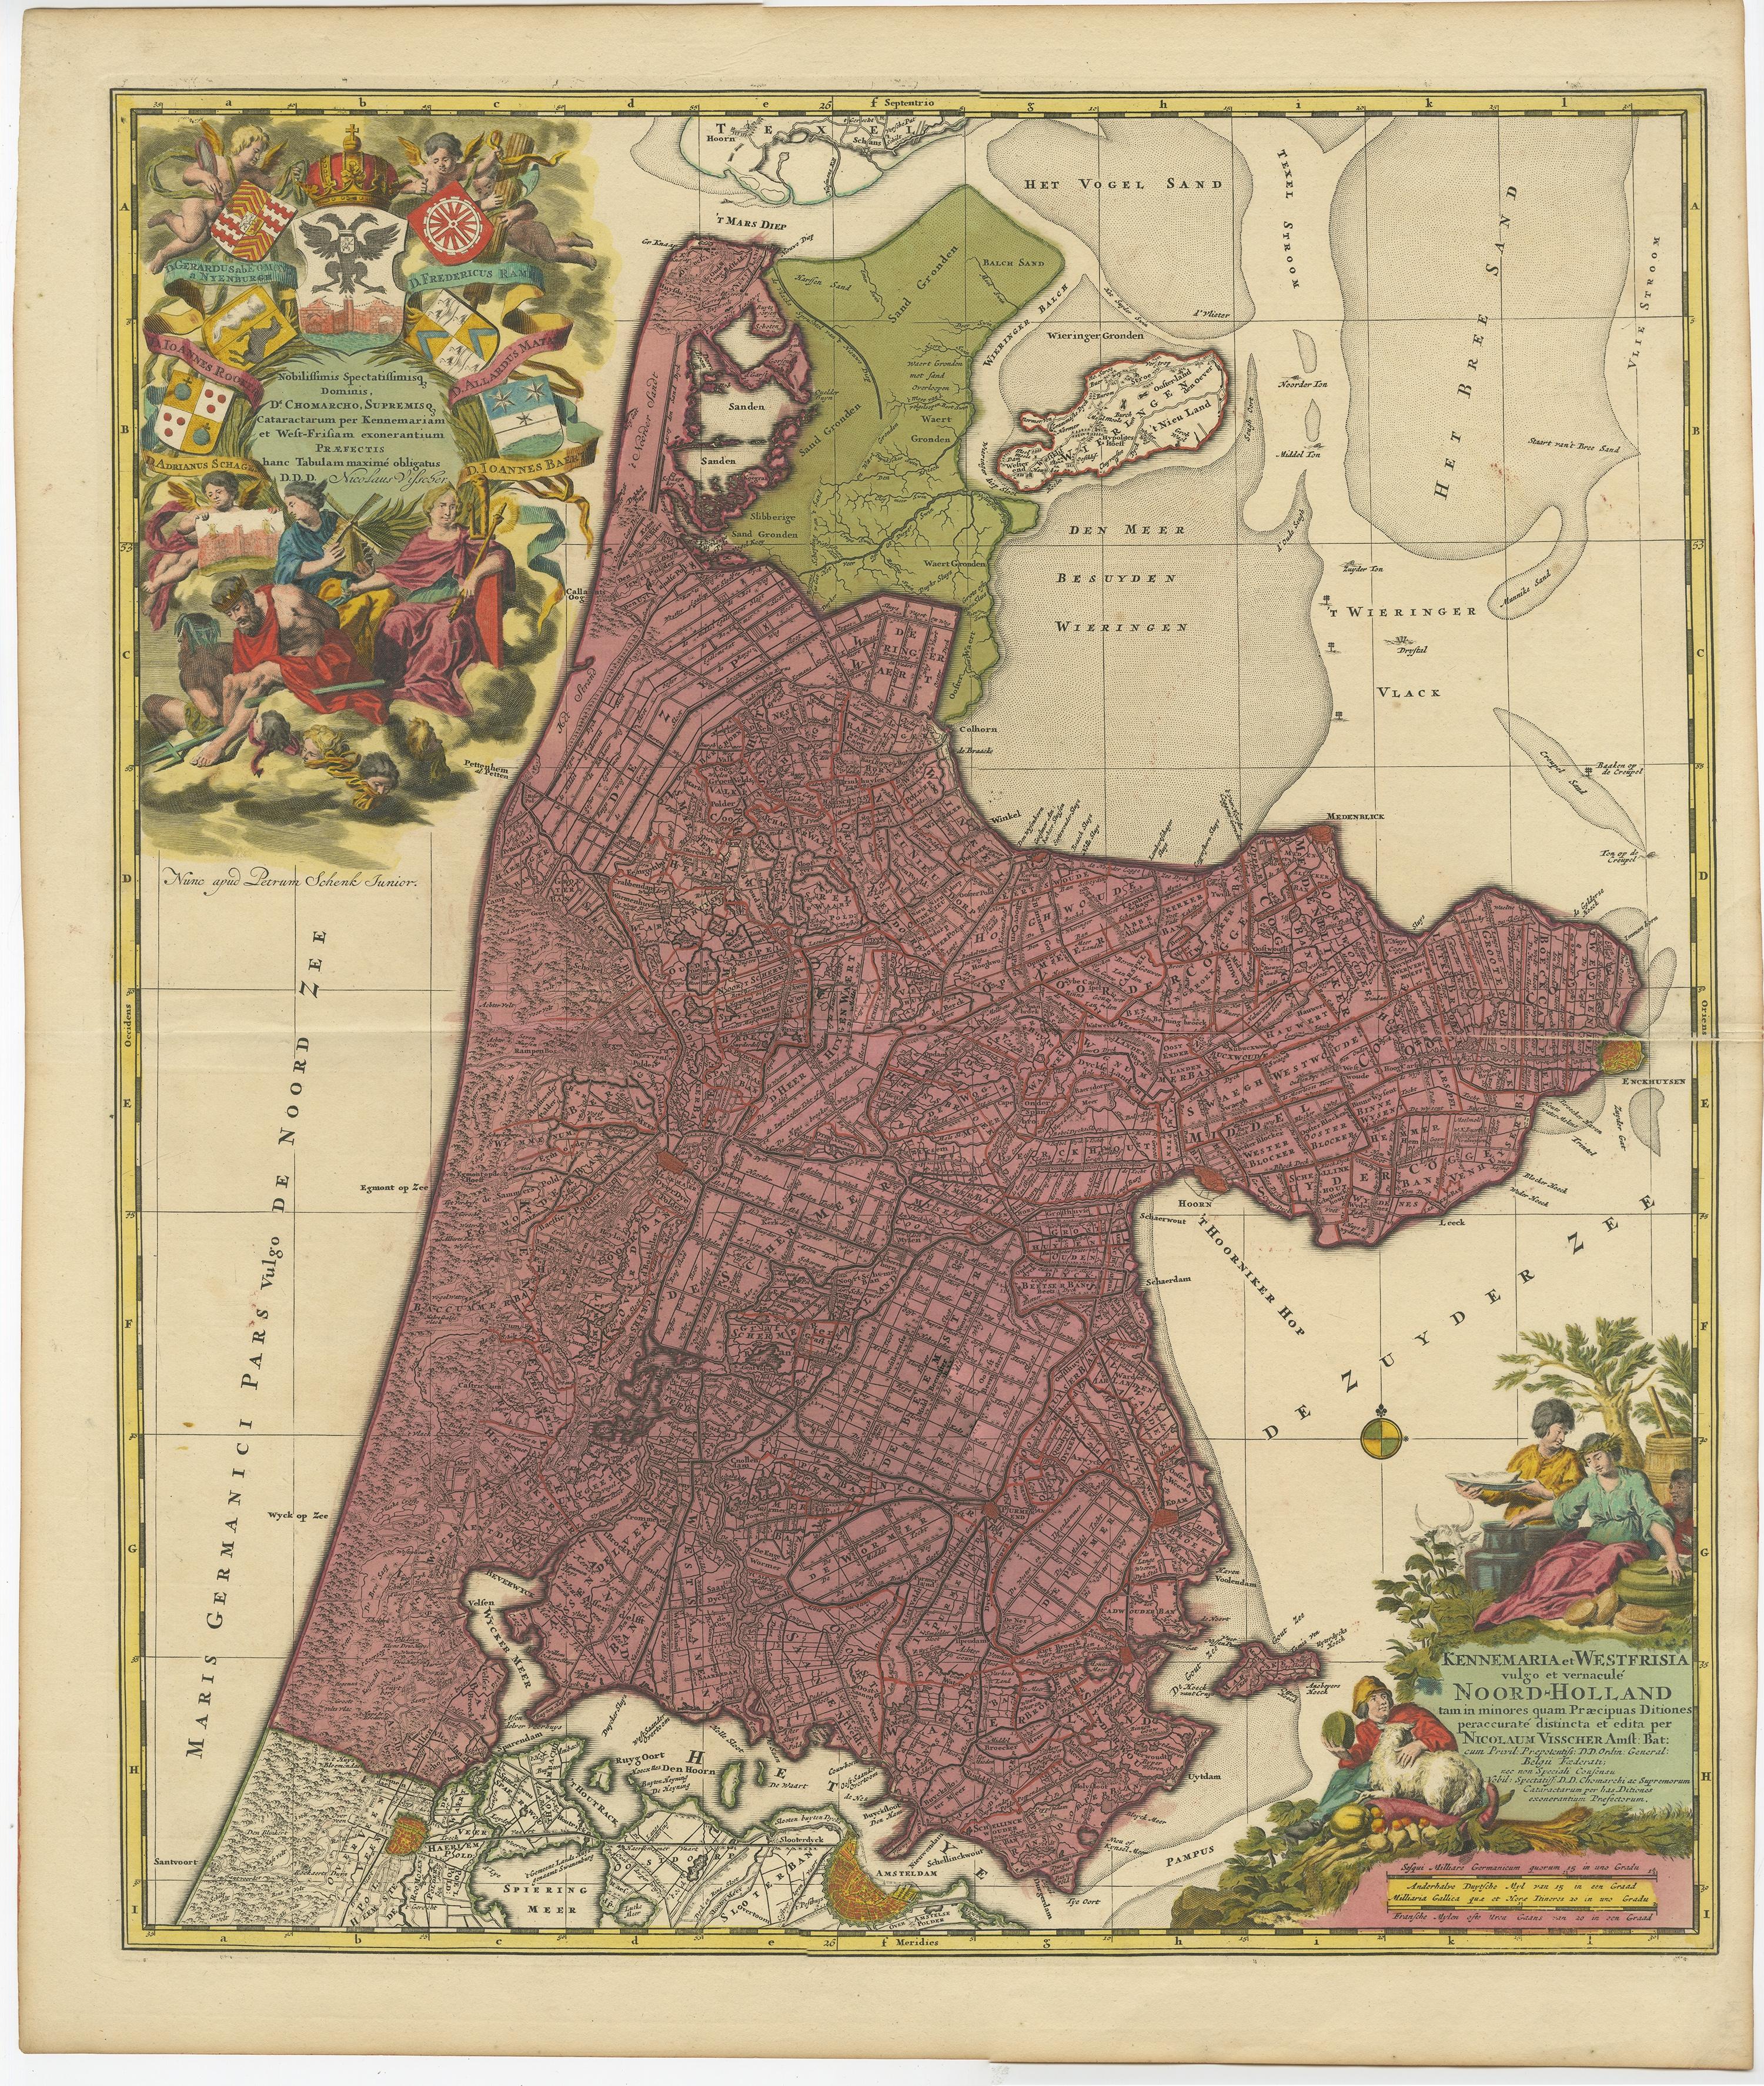 Antique map titled 'Kennemaria et Westfrisia vulgo et vernaculé Noord-Holland'. 

Beautiful original antique map of the province of Noord-Holland, the Netherlands. Two large elaborate cartouches, one with coats of arms. Shows the cities of